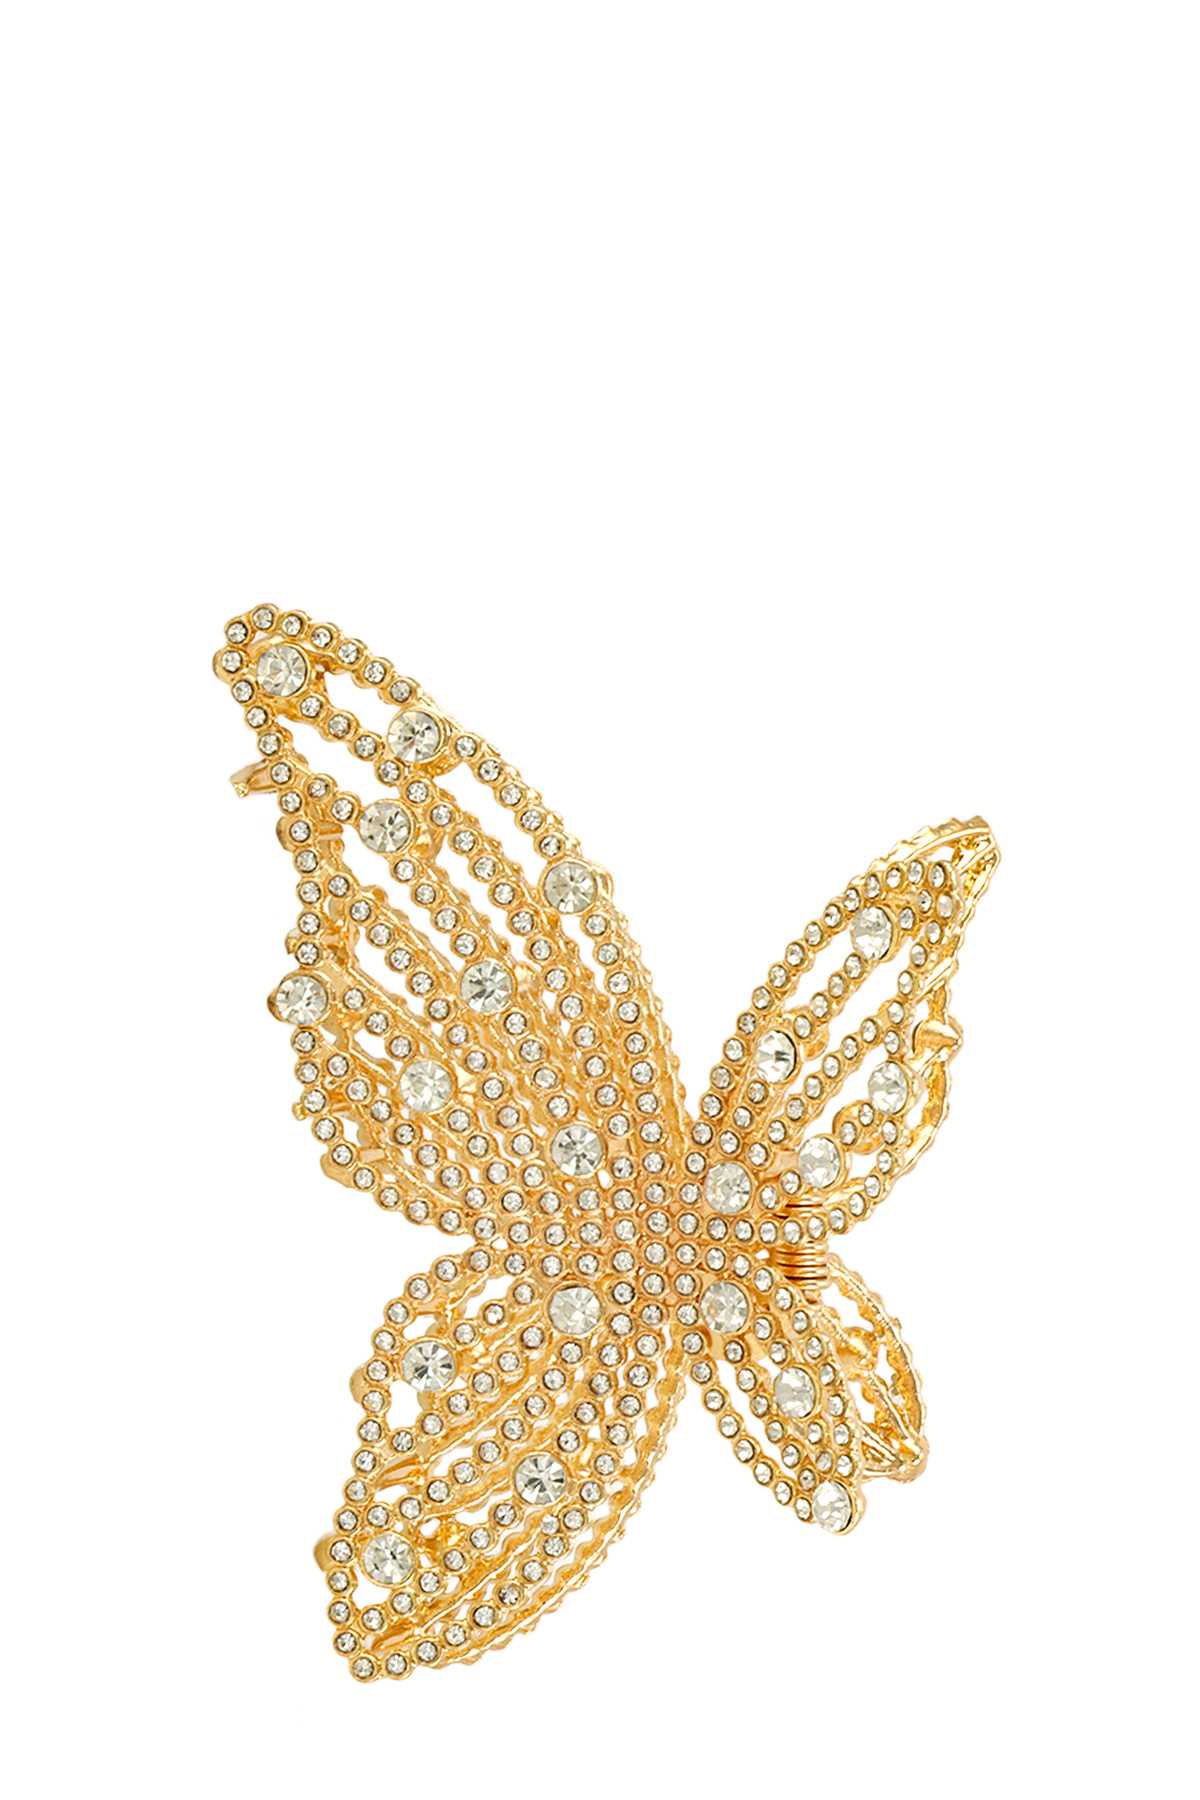 METAL AND RHINESTONE BUTTERFLY SHAPE HAIR CLIP